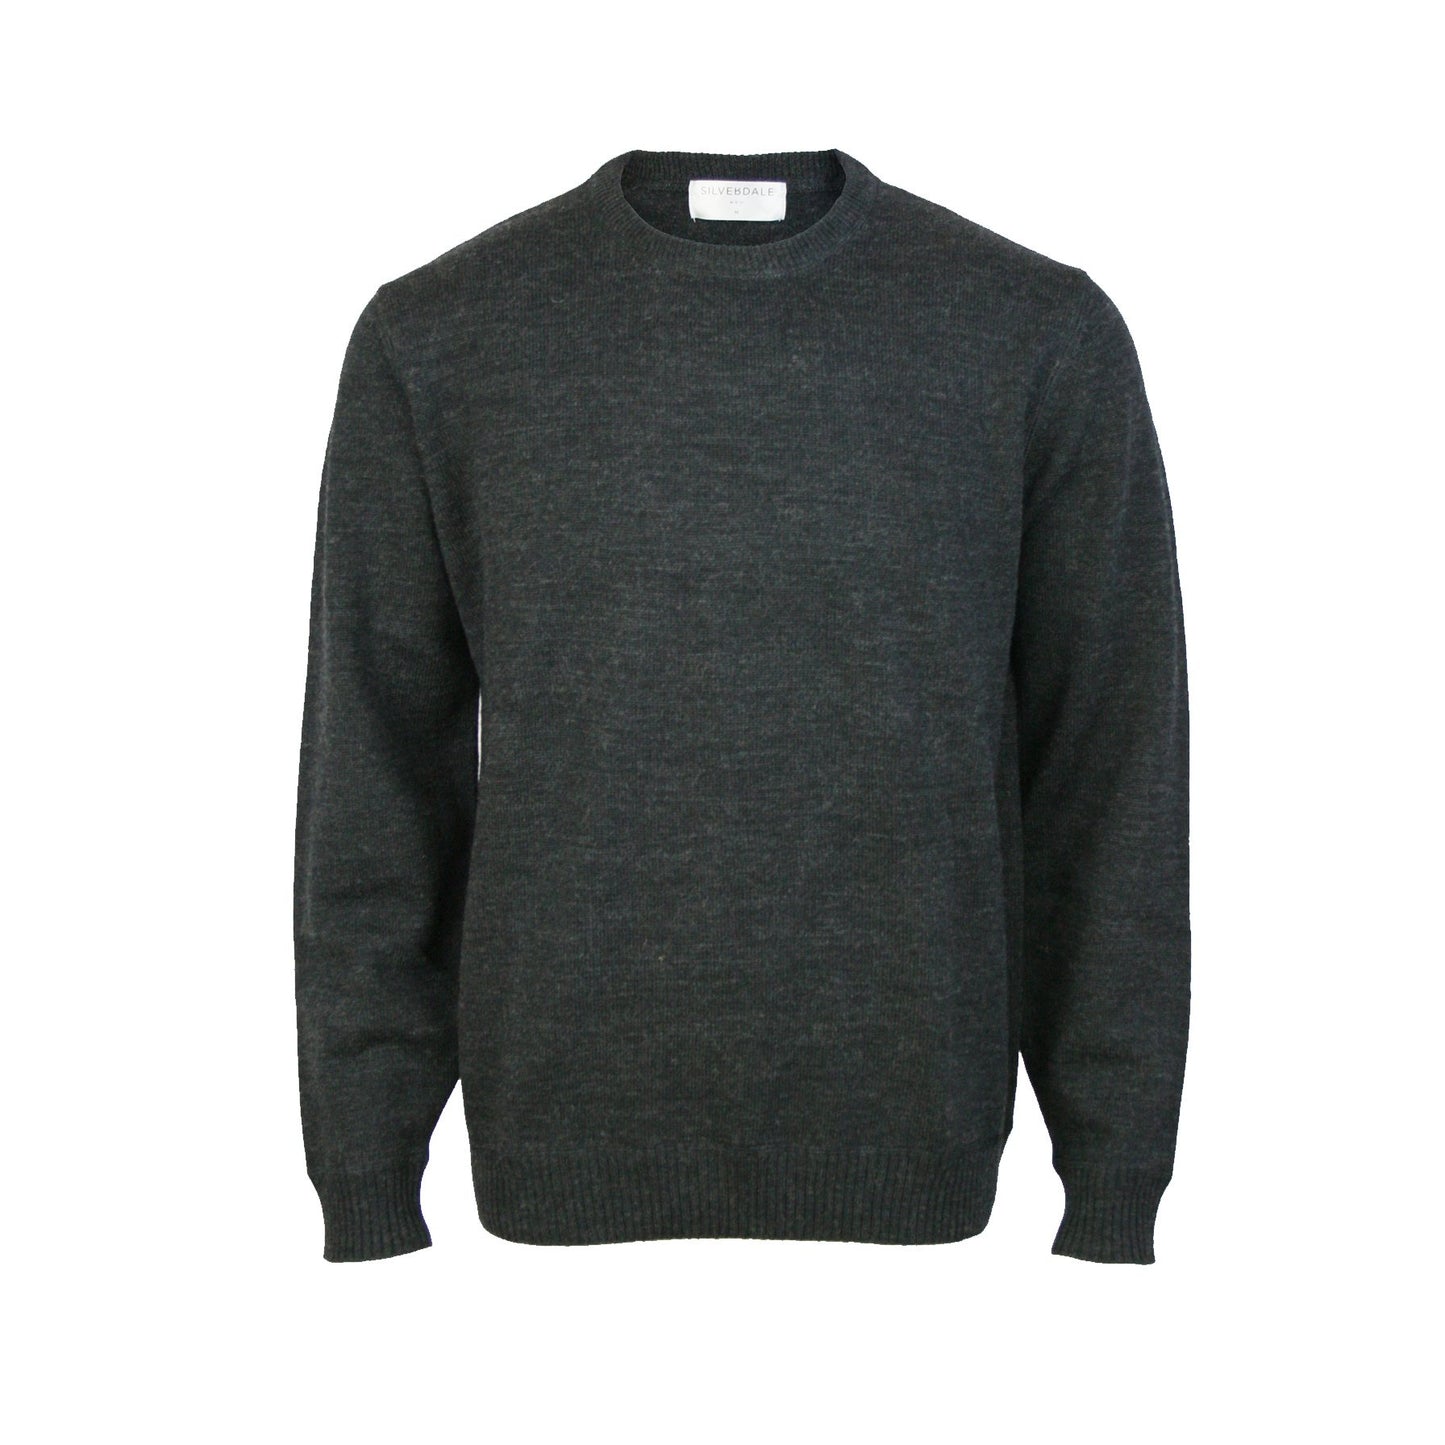 Silverdale - Crew Neck Pullover - Charcoal